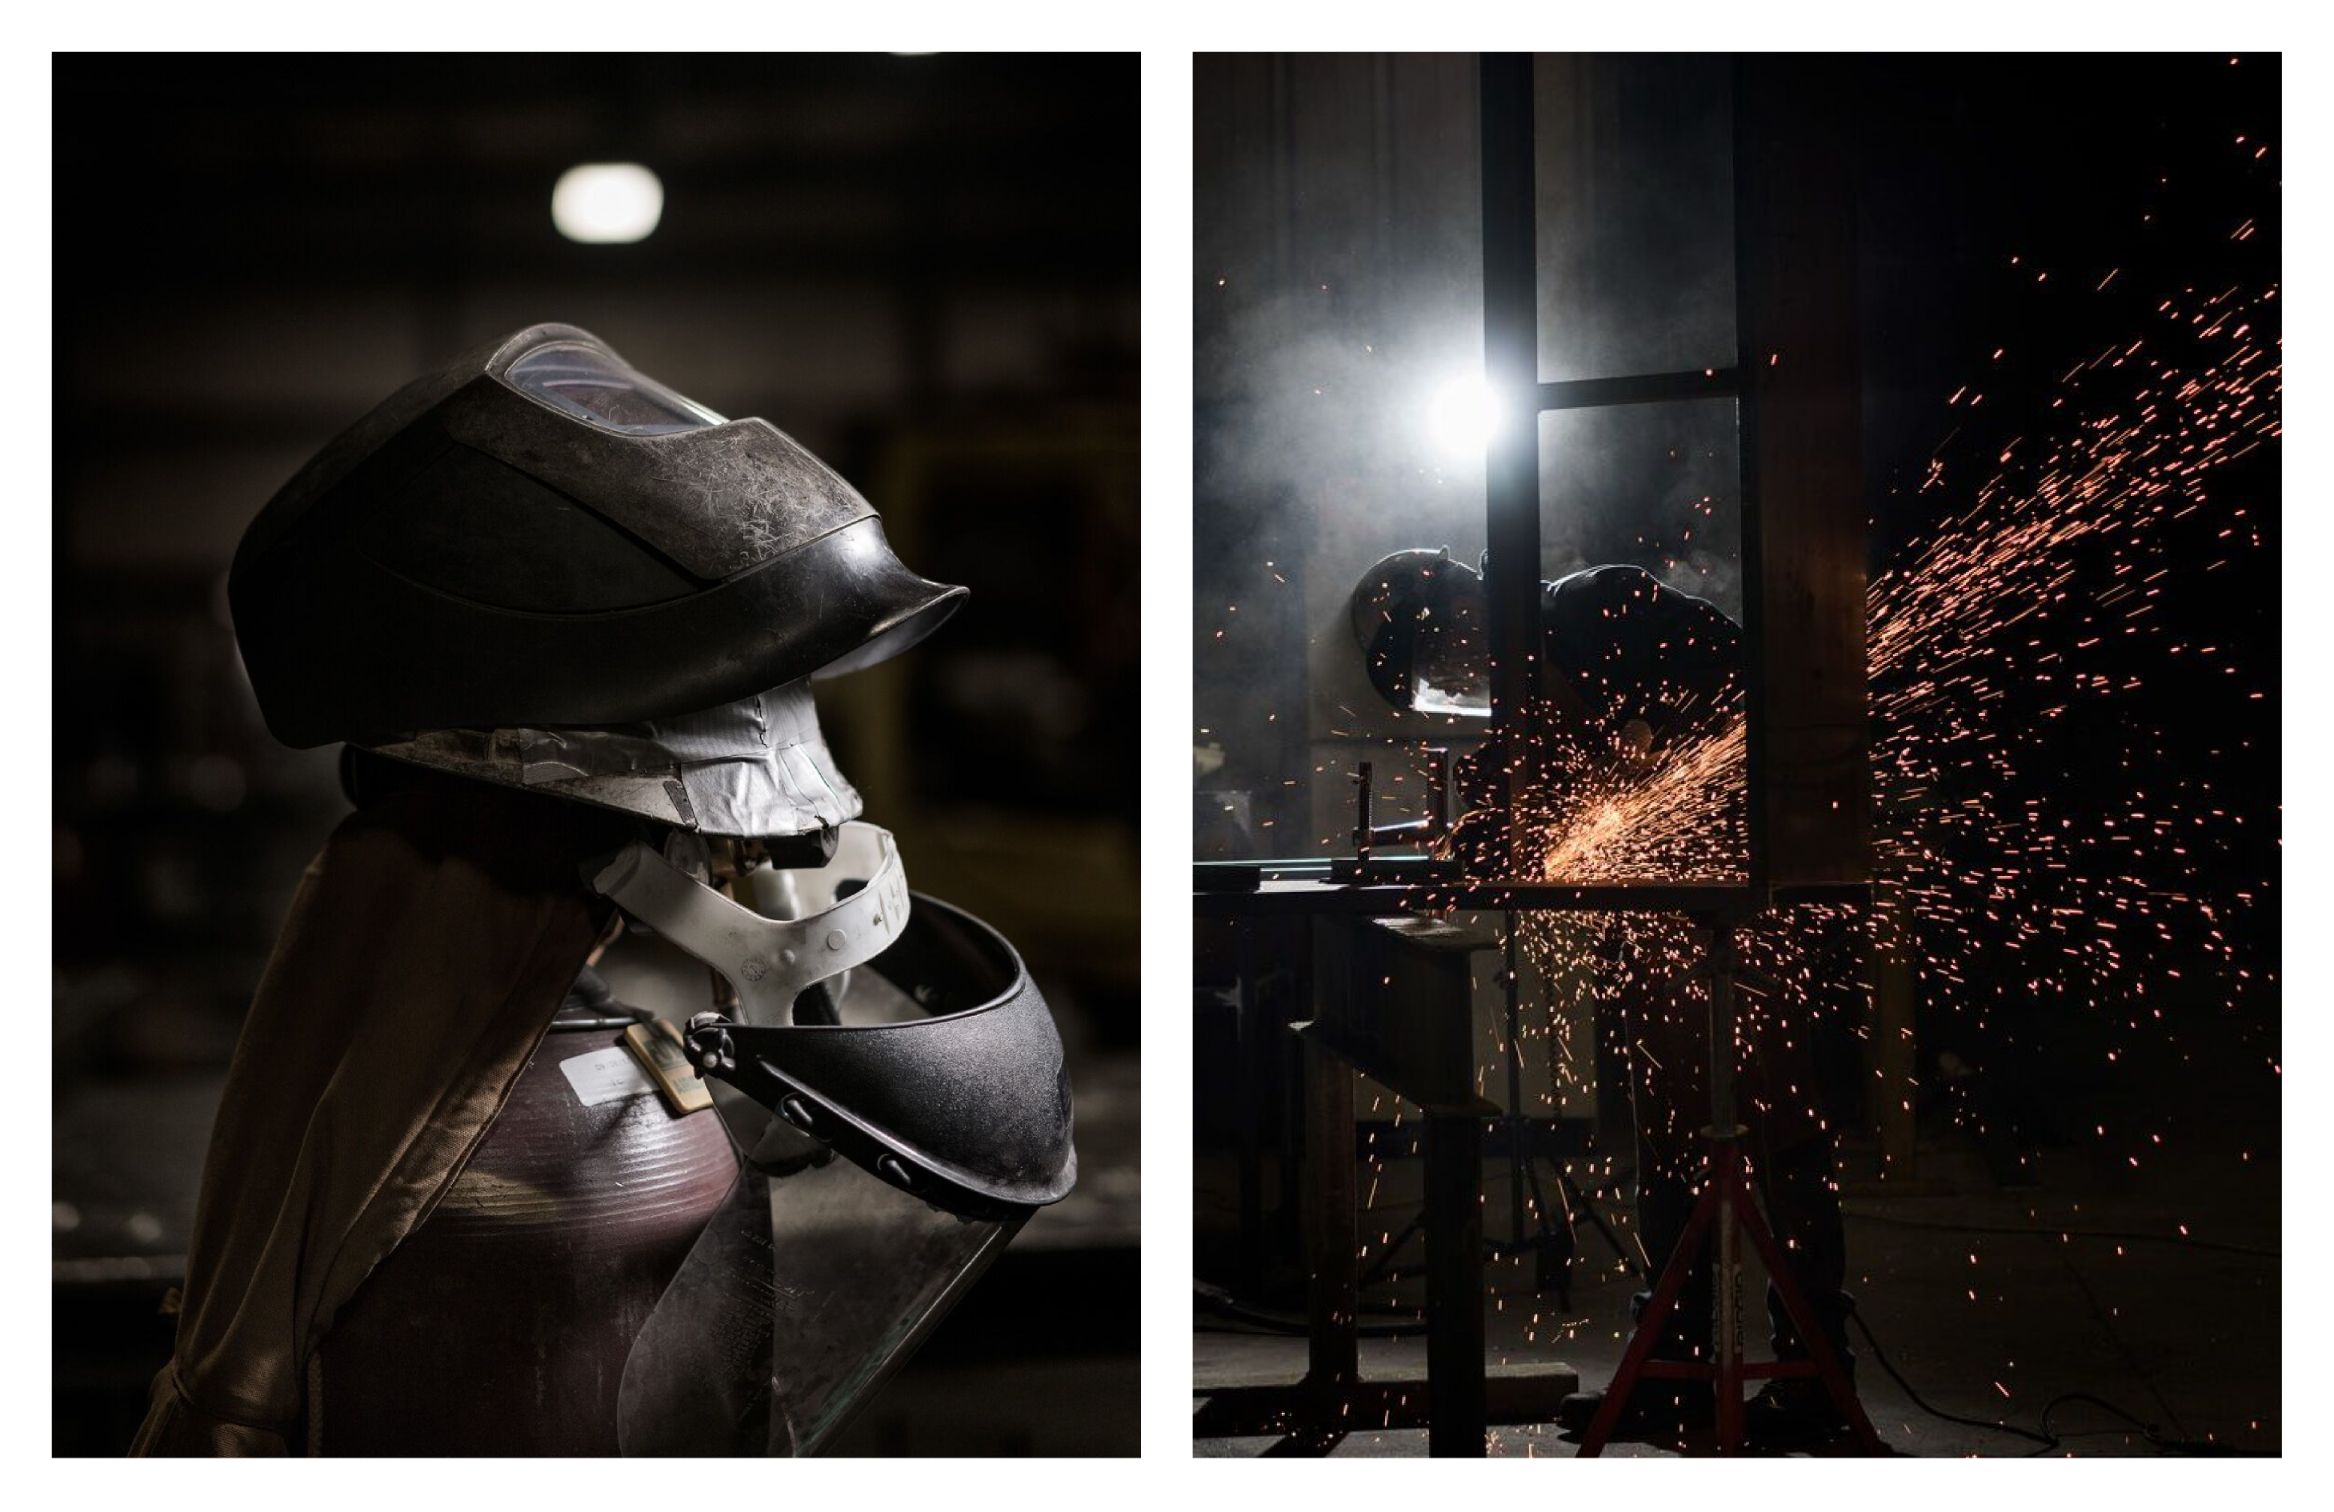 Image of the mask that is used in welding and image of a welder welding with metal sparks